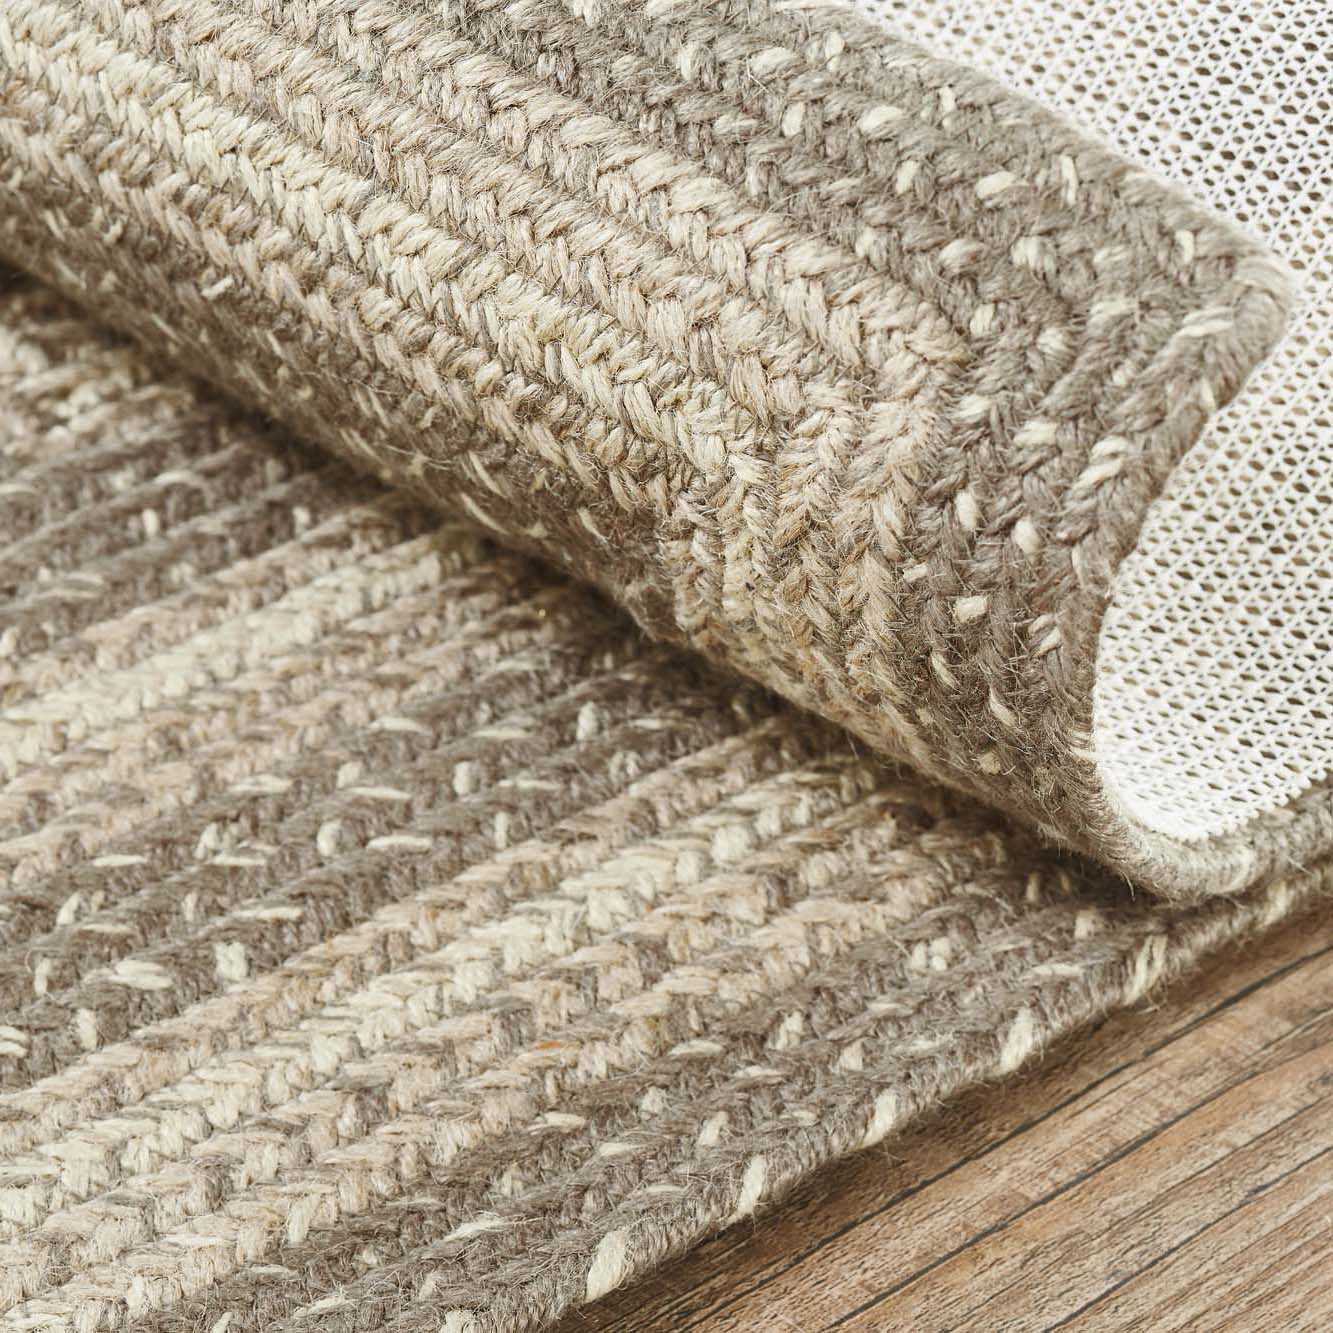 Cobblestone Jute Braided Rug Rect with Rug Pad 27"x48" VHC Brands